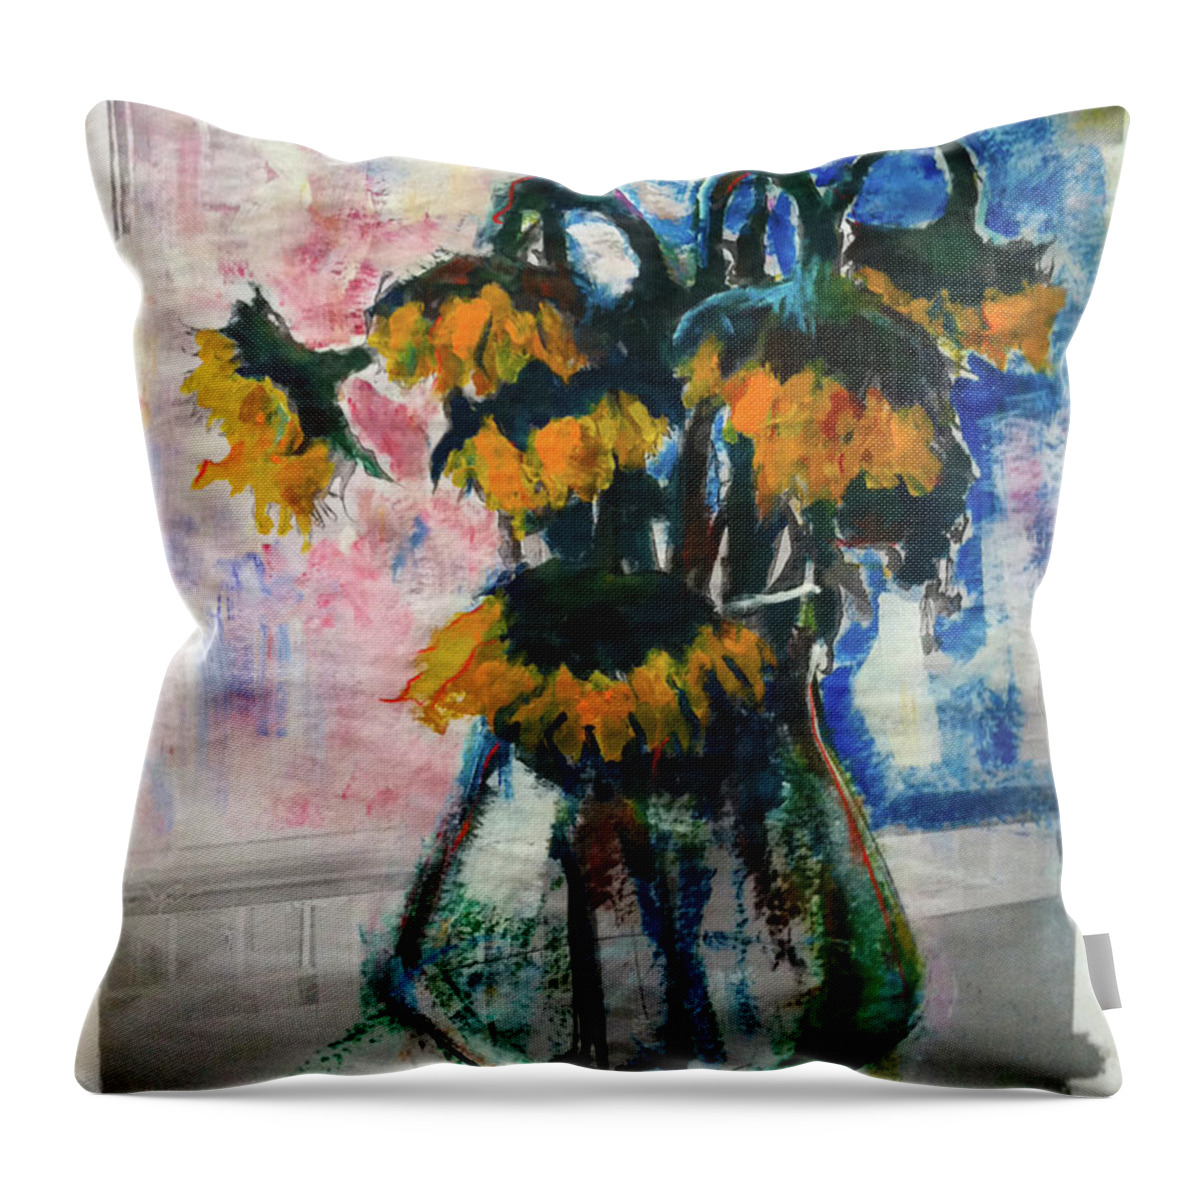  Throw Pillow featuring the painting Sleeping beauties by Maxim Komissarchik